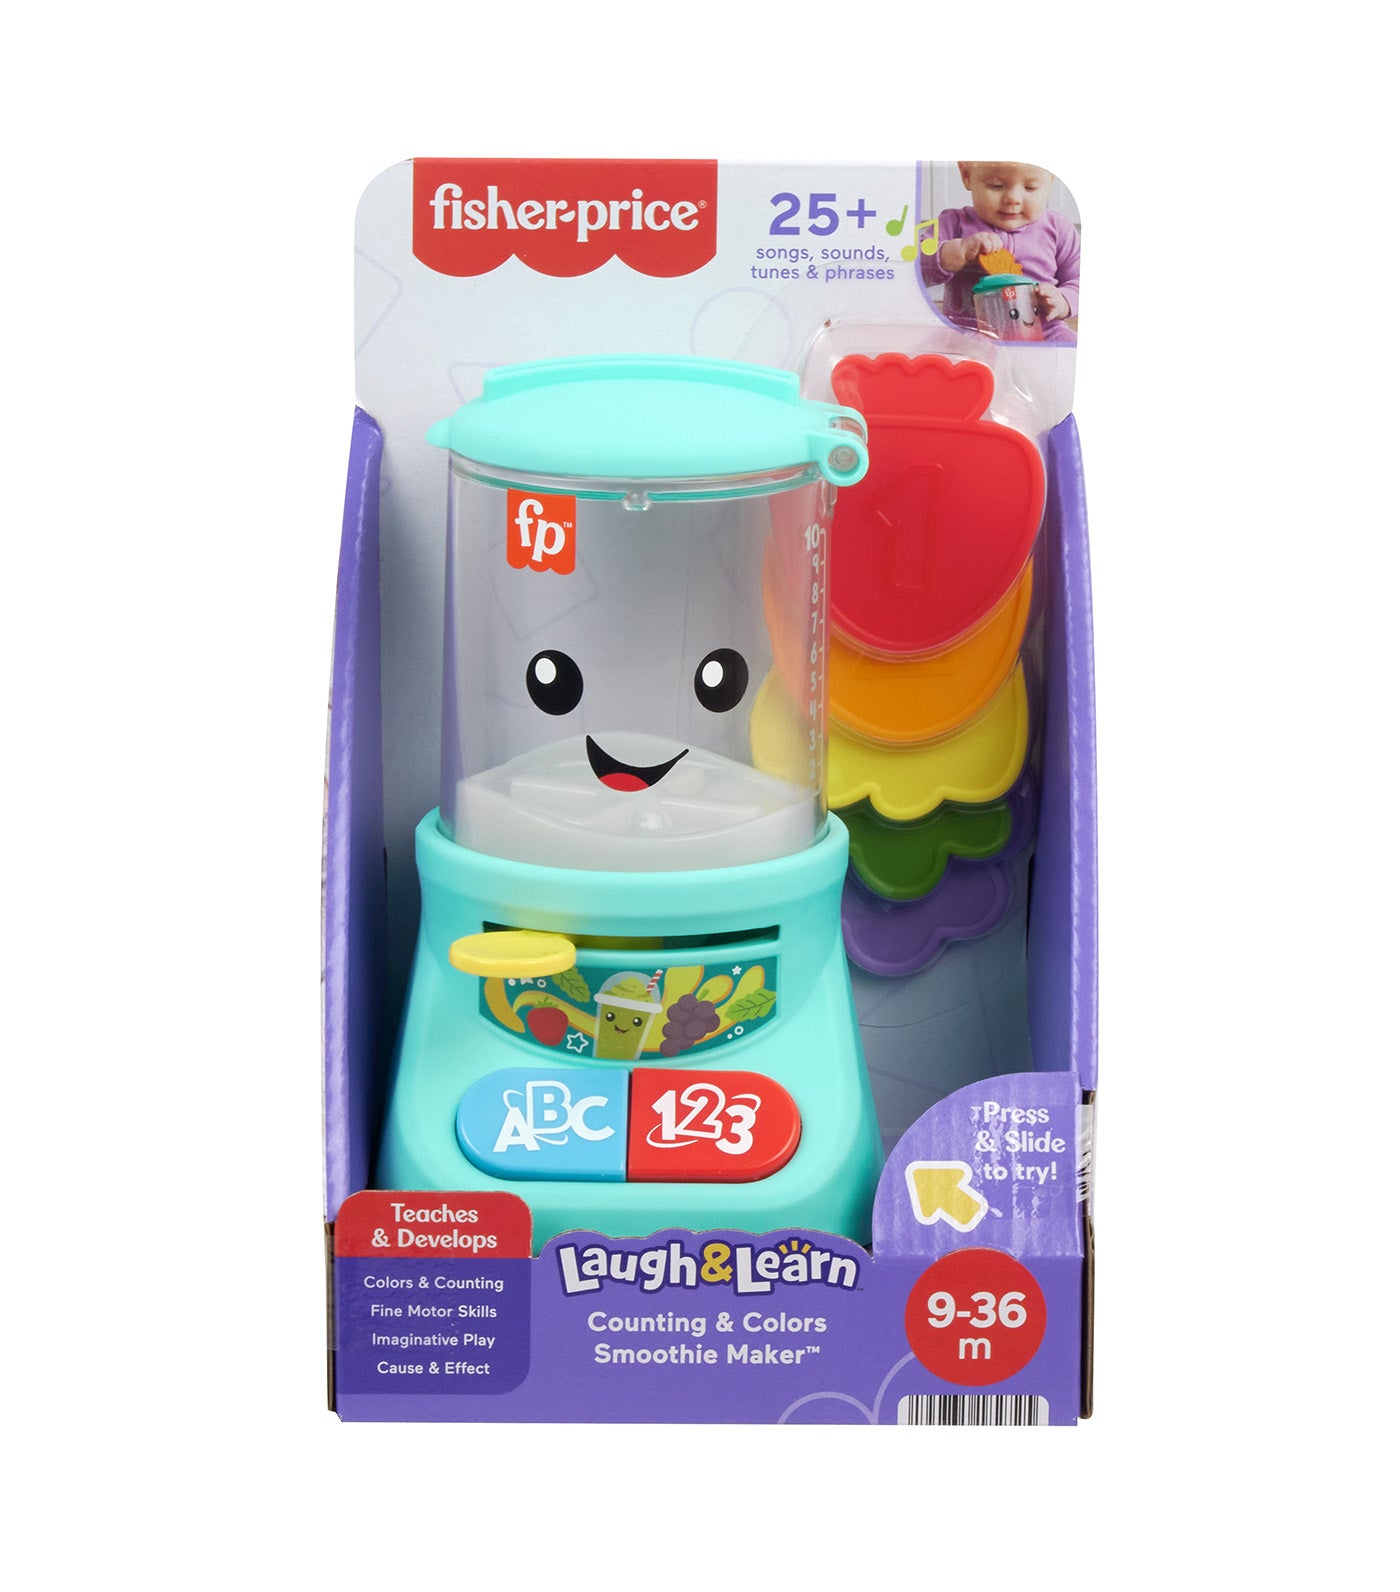 Laugh & Learn Counting and Colors Smoothie Maker